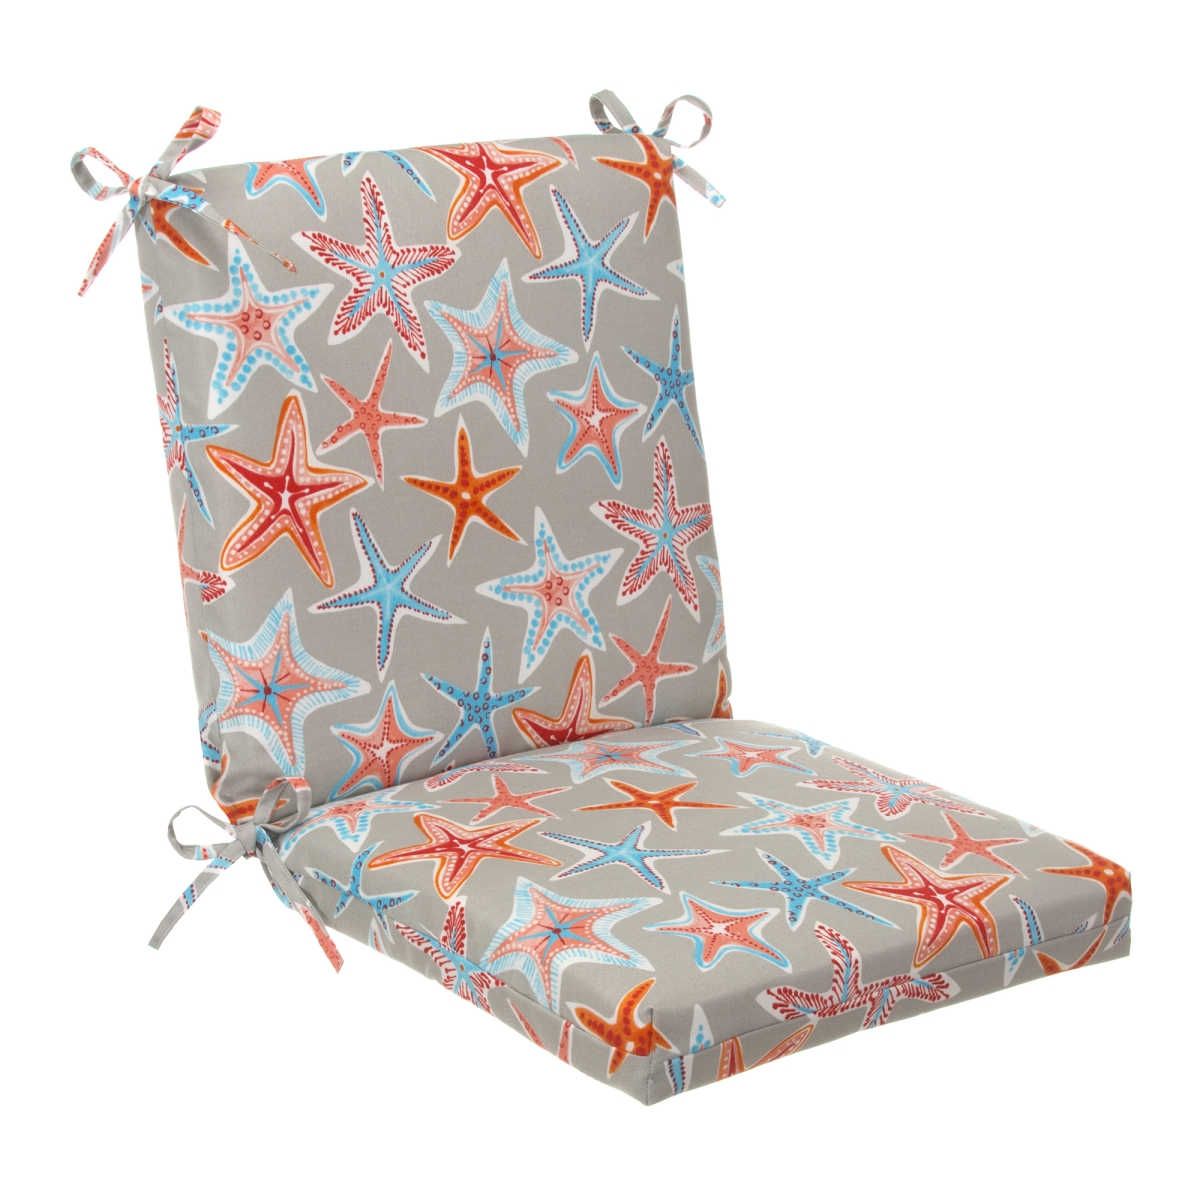 70122 Reach For The Stars Indoor & Outdoor Square Chair Cushion, Orange